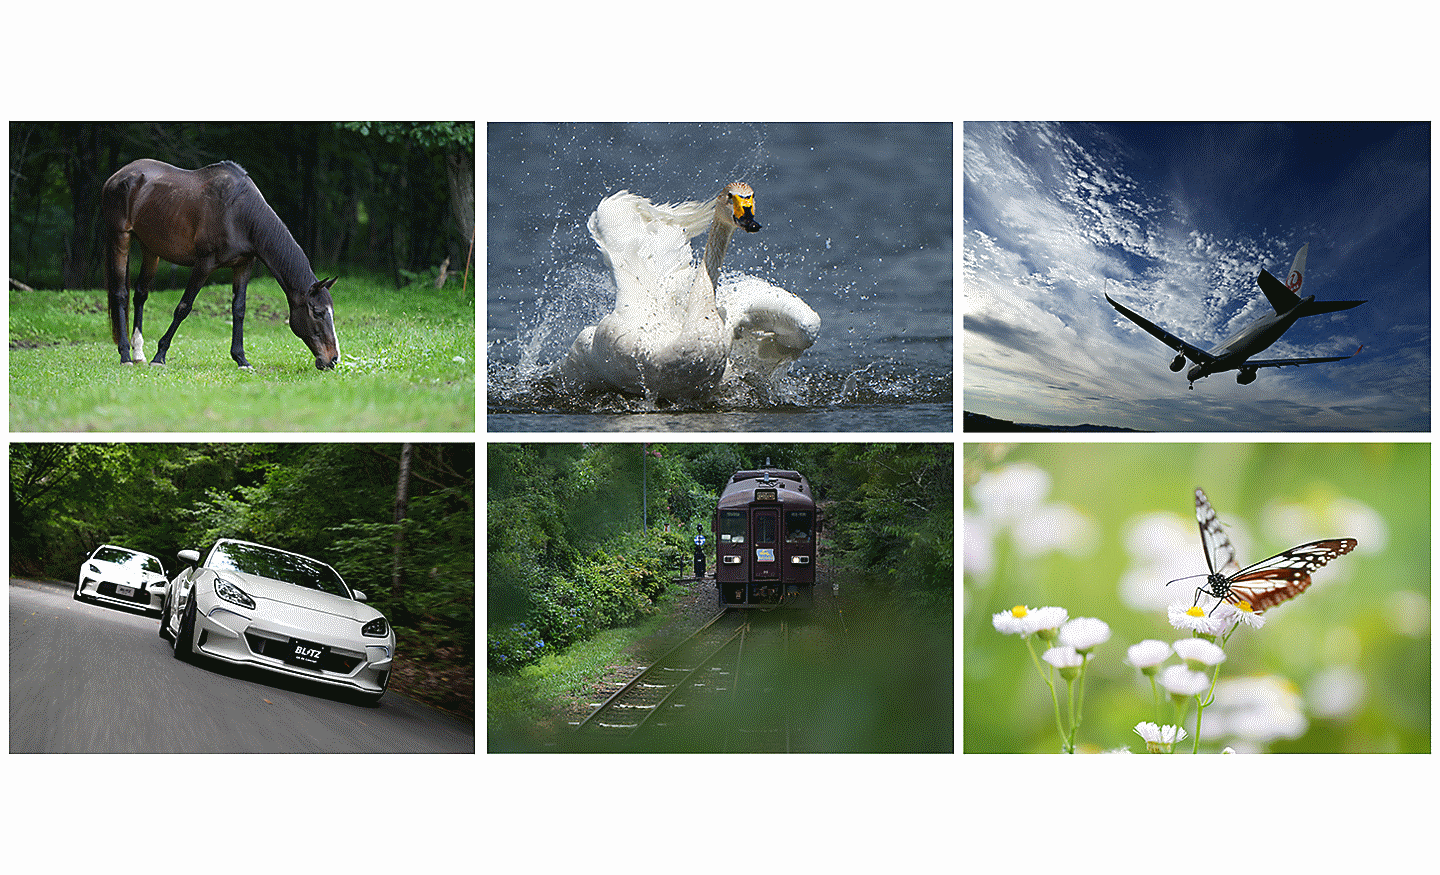 Images of horse, airplane, bird, car, train and butterfly